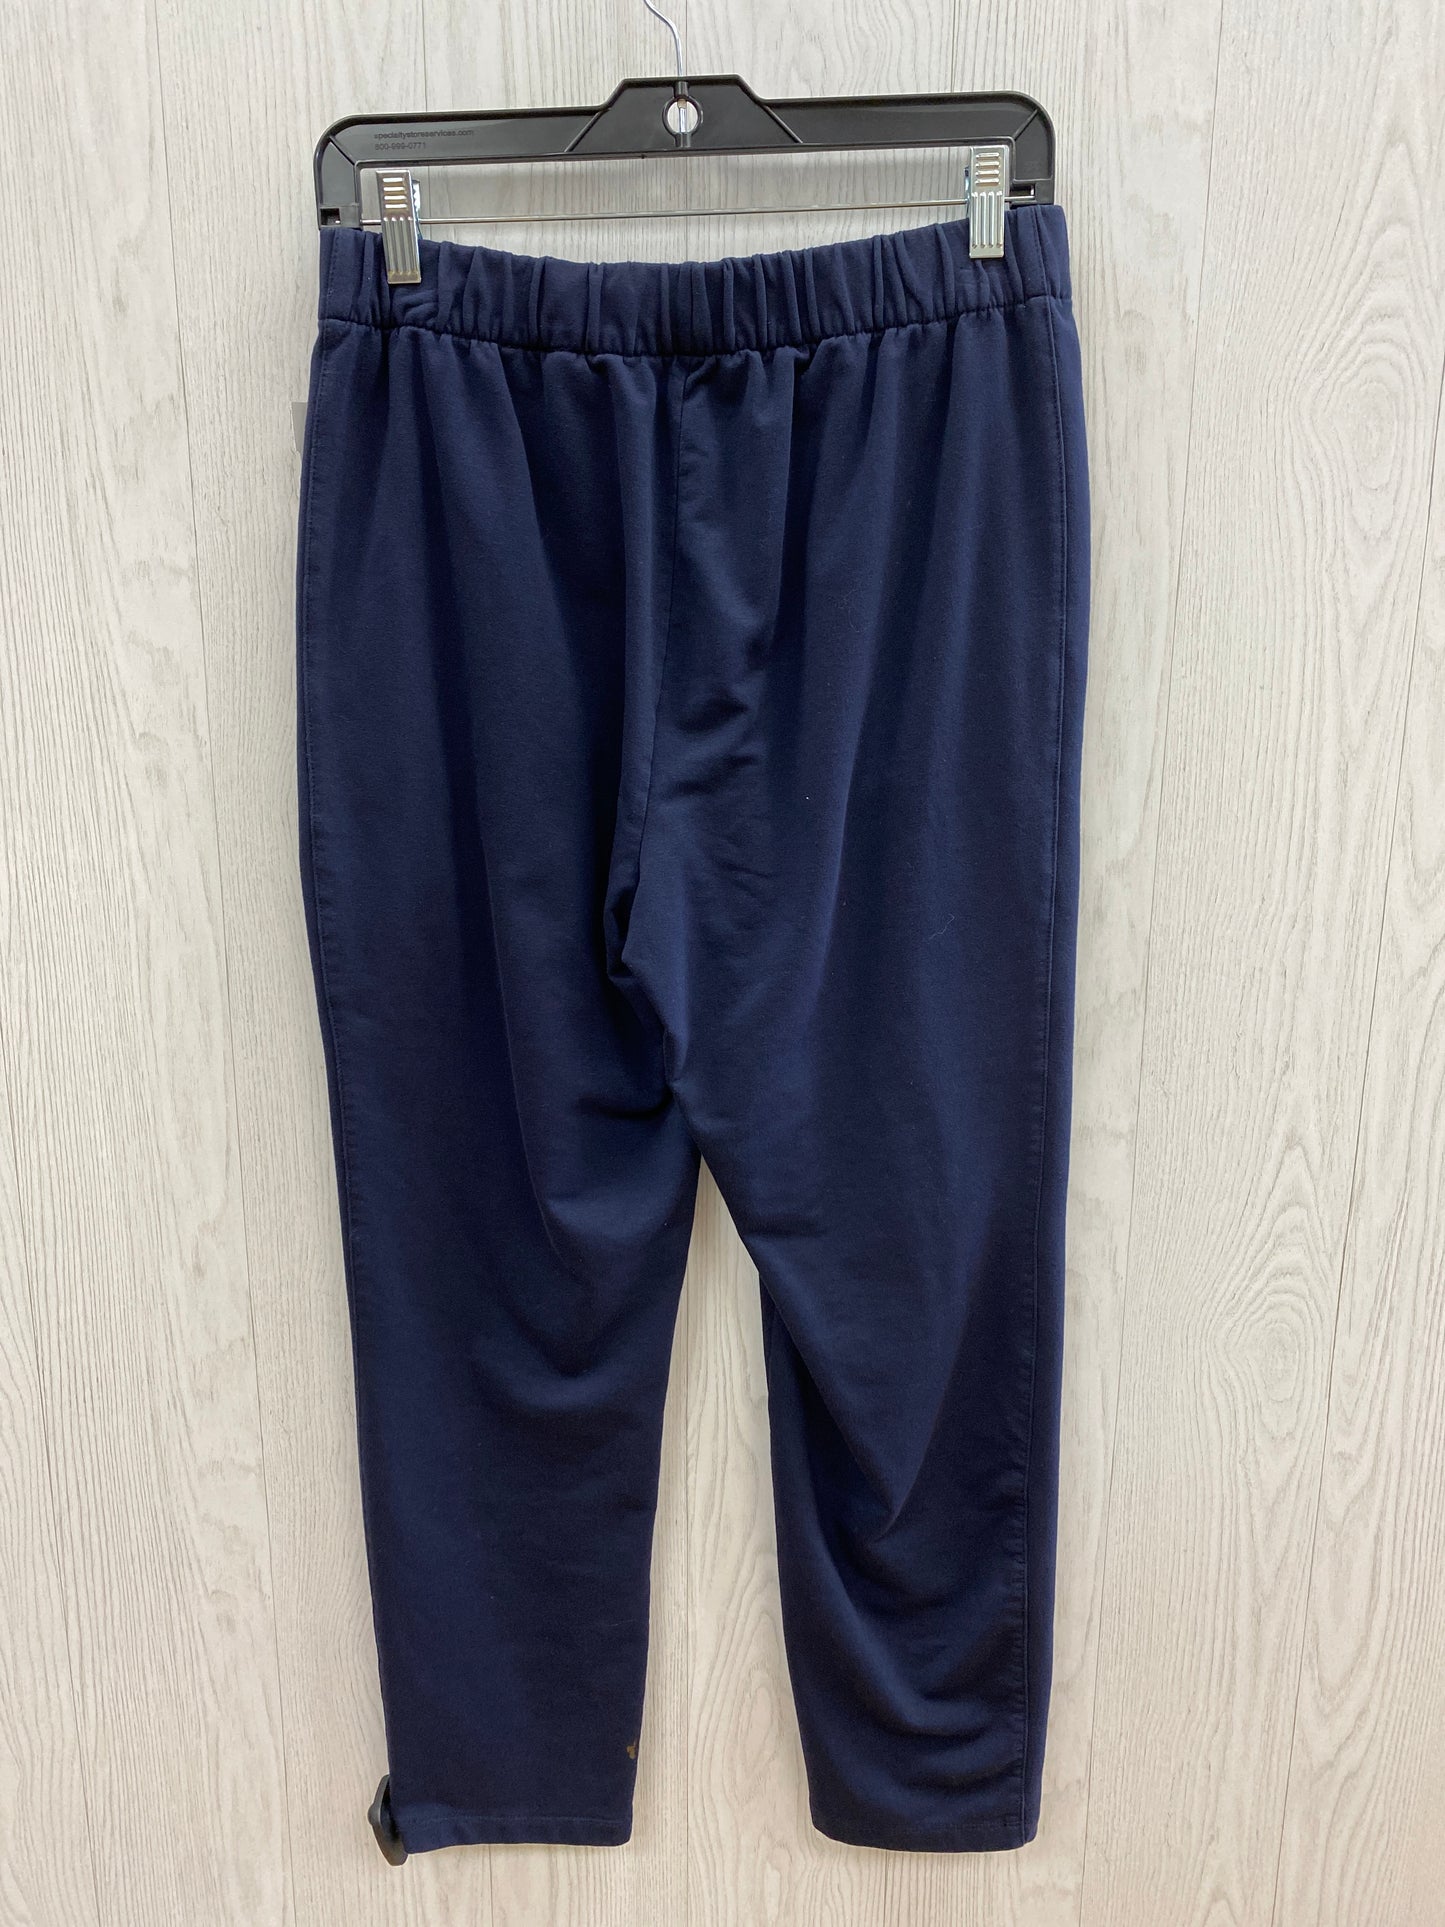 Pants Lounge By Talbots  Size: S